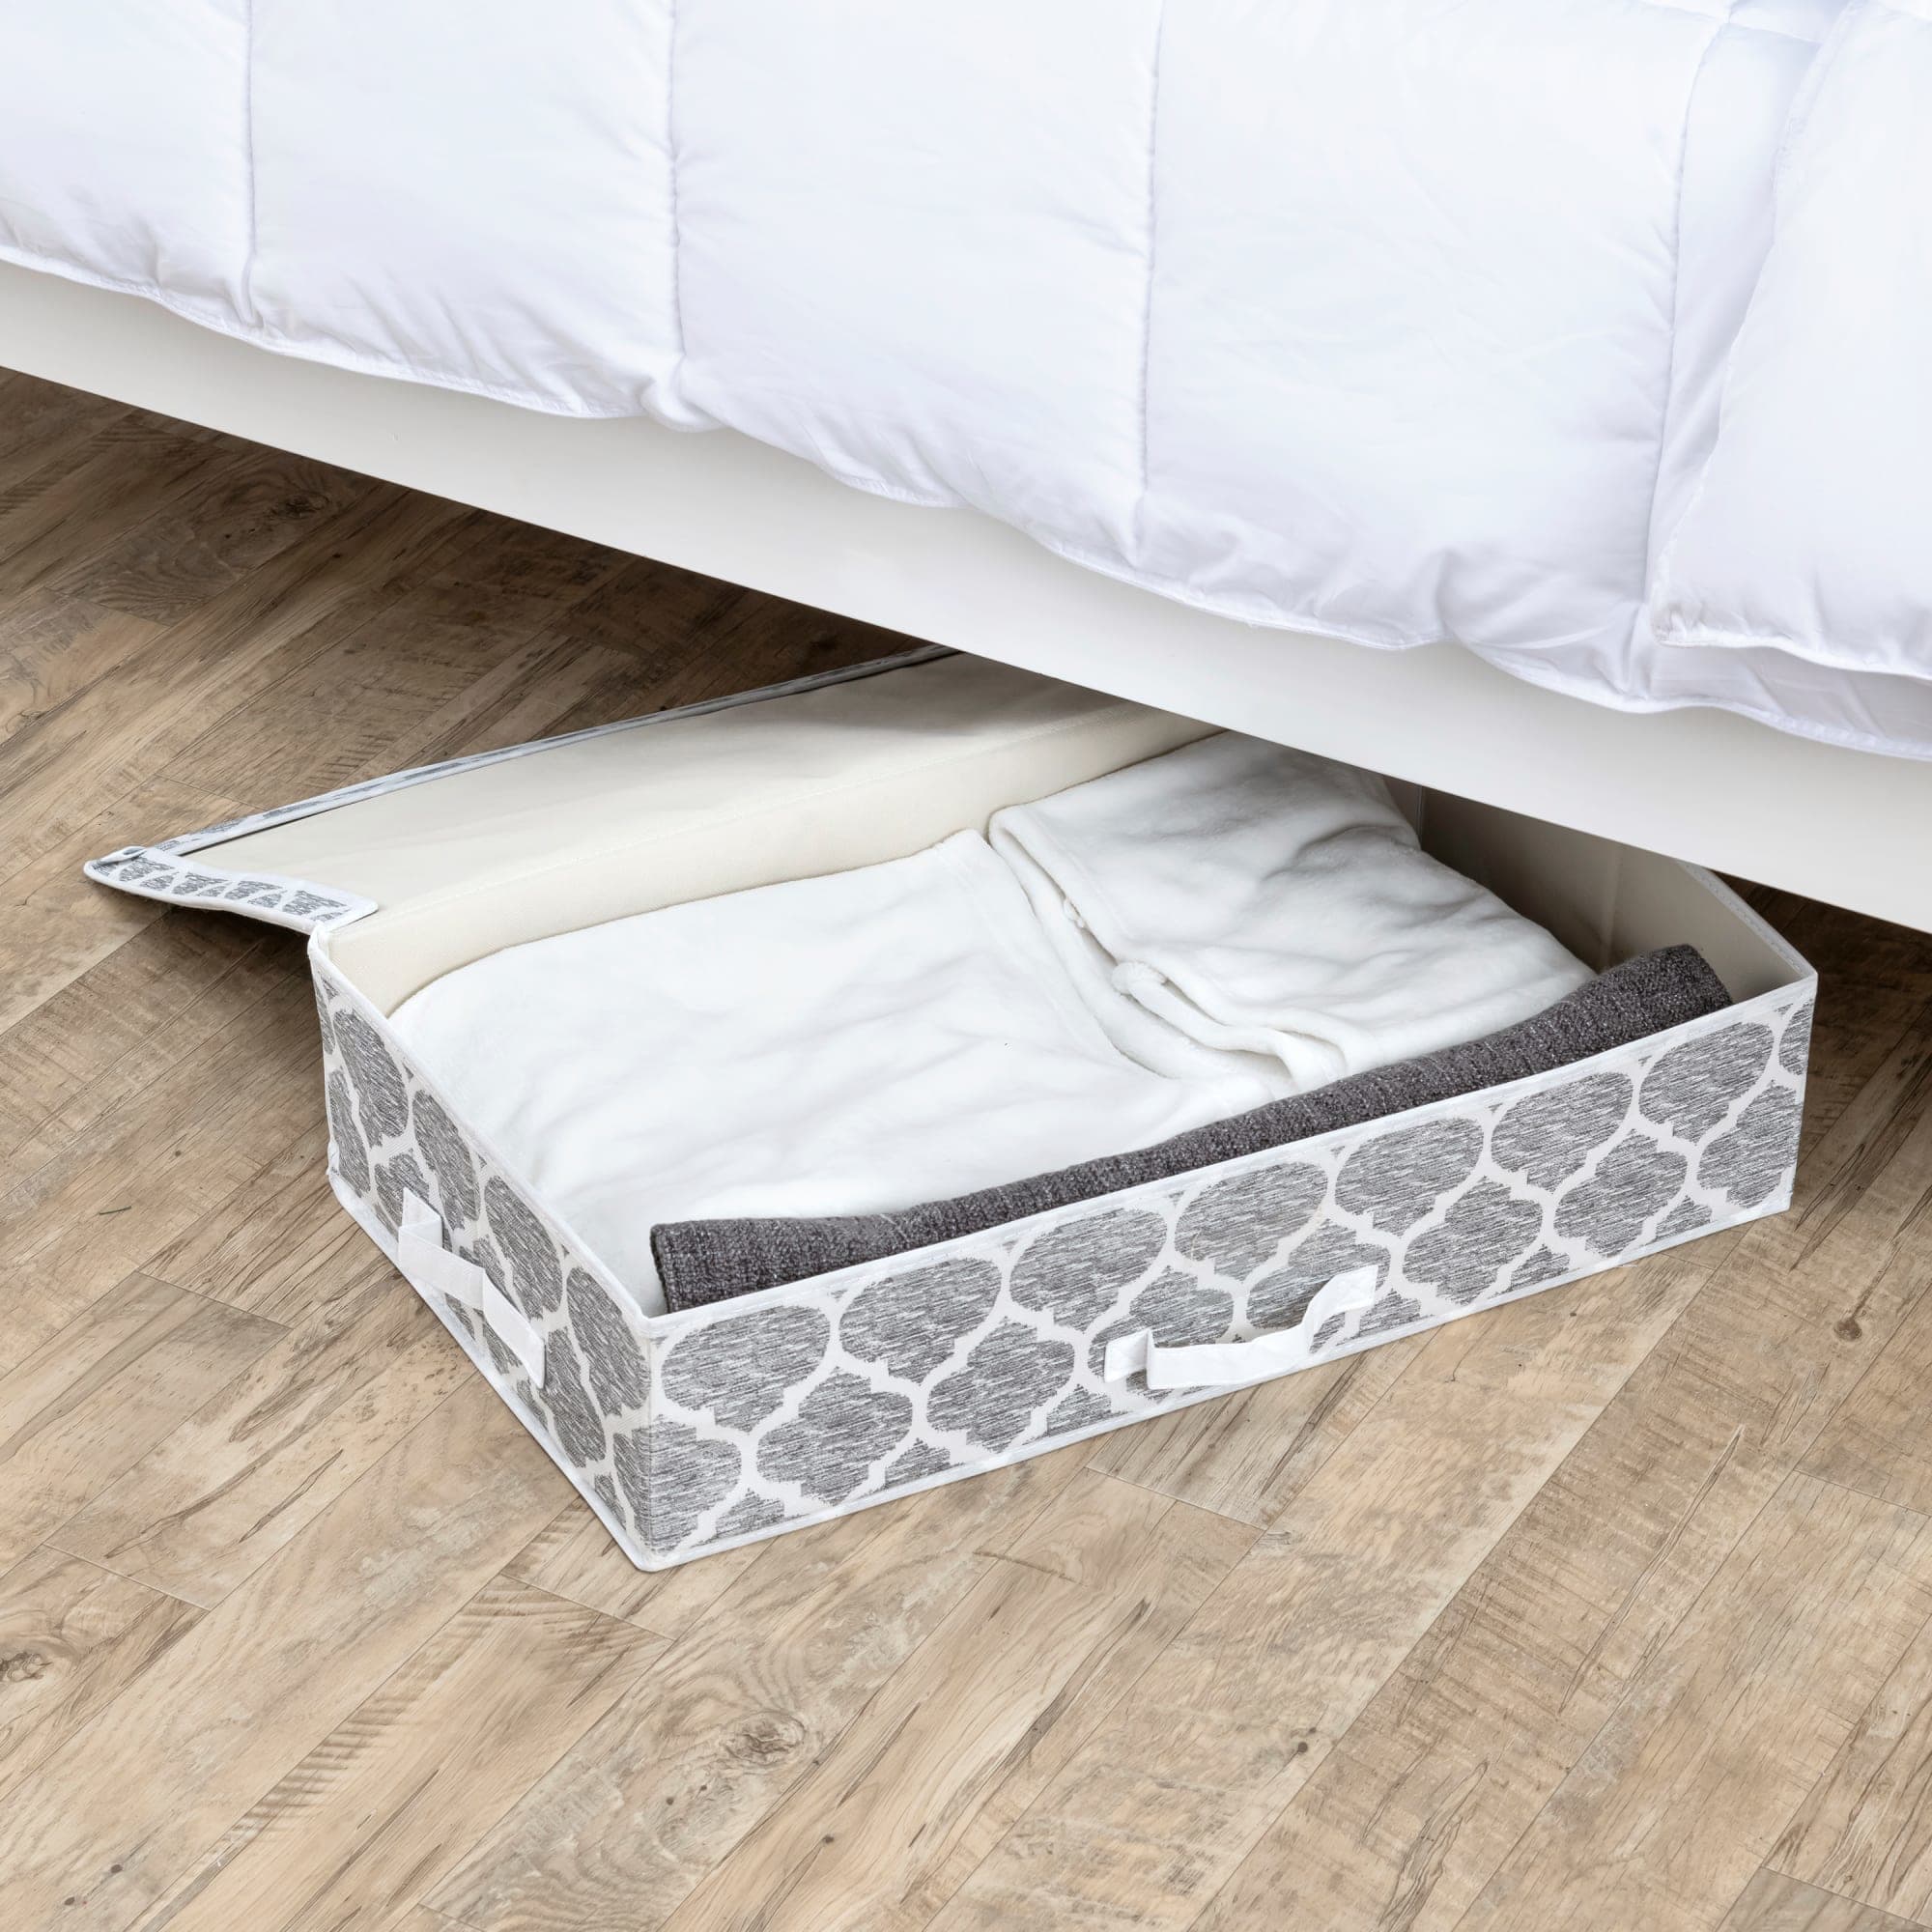 Home Basics Arabesque Non-woven Under the Bed Organizer, Grey $8.00 EACH, CASE PACK OF 12